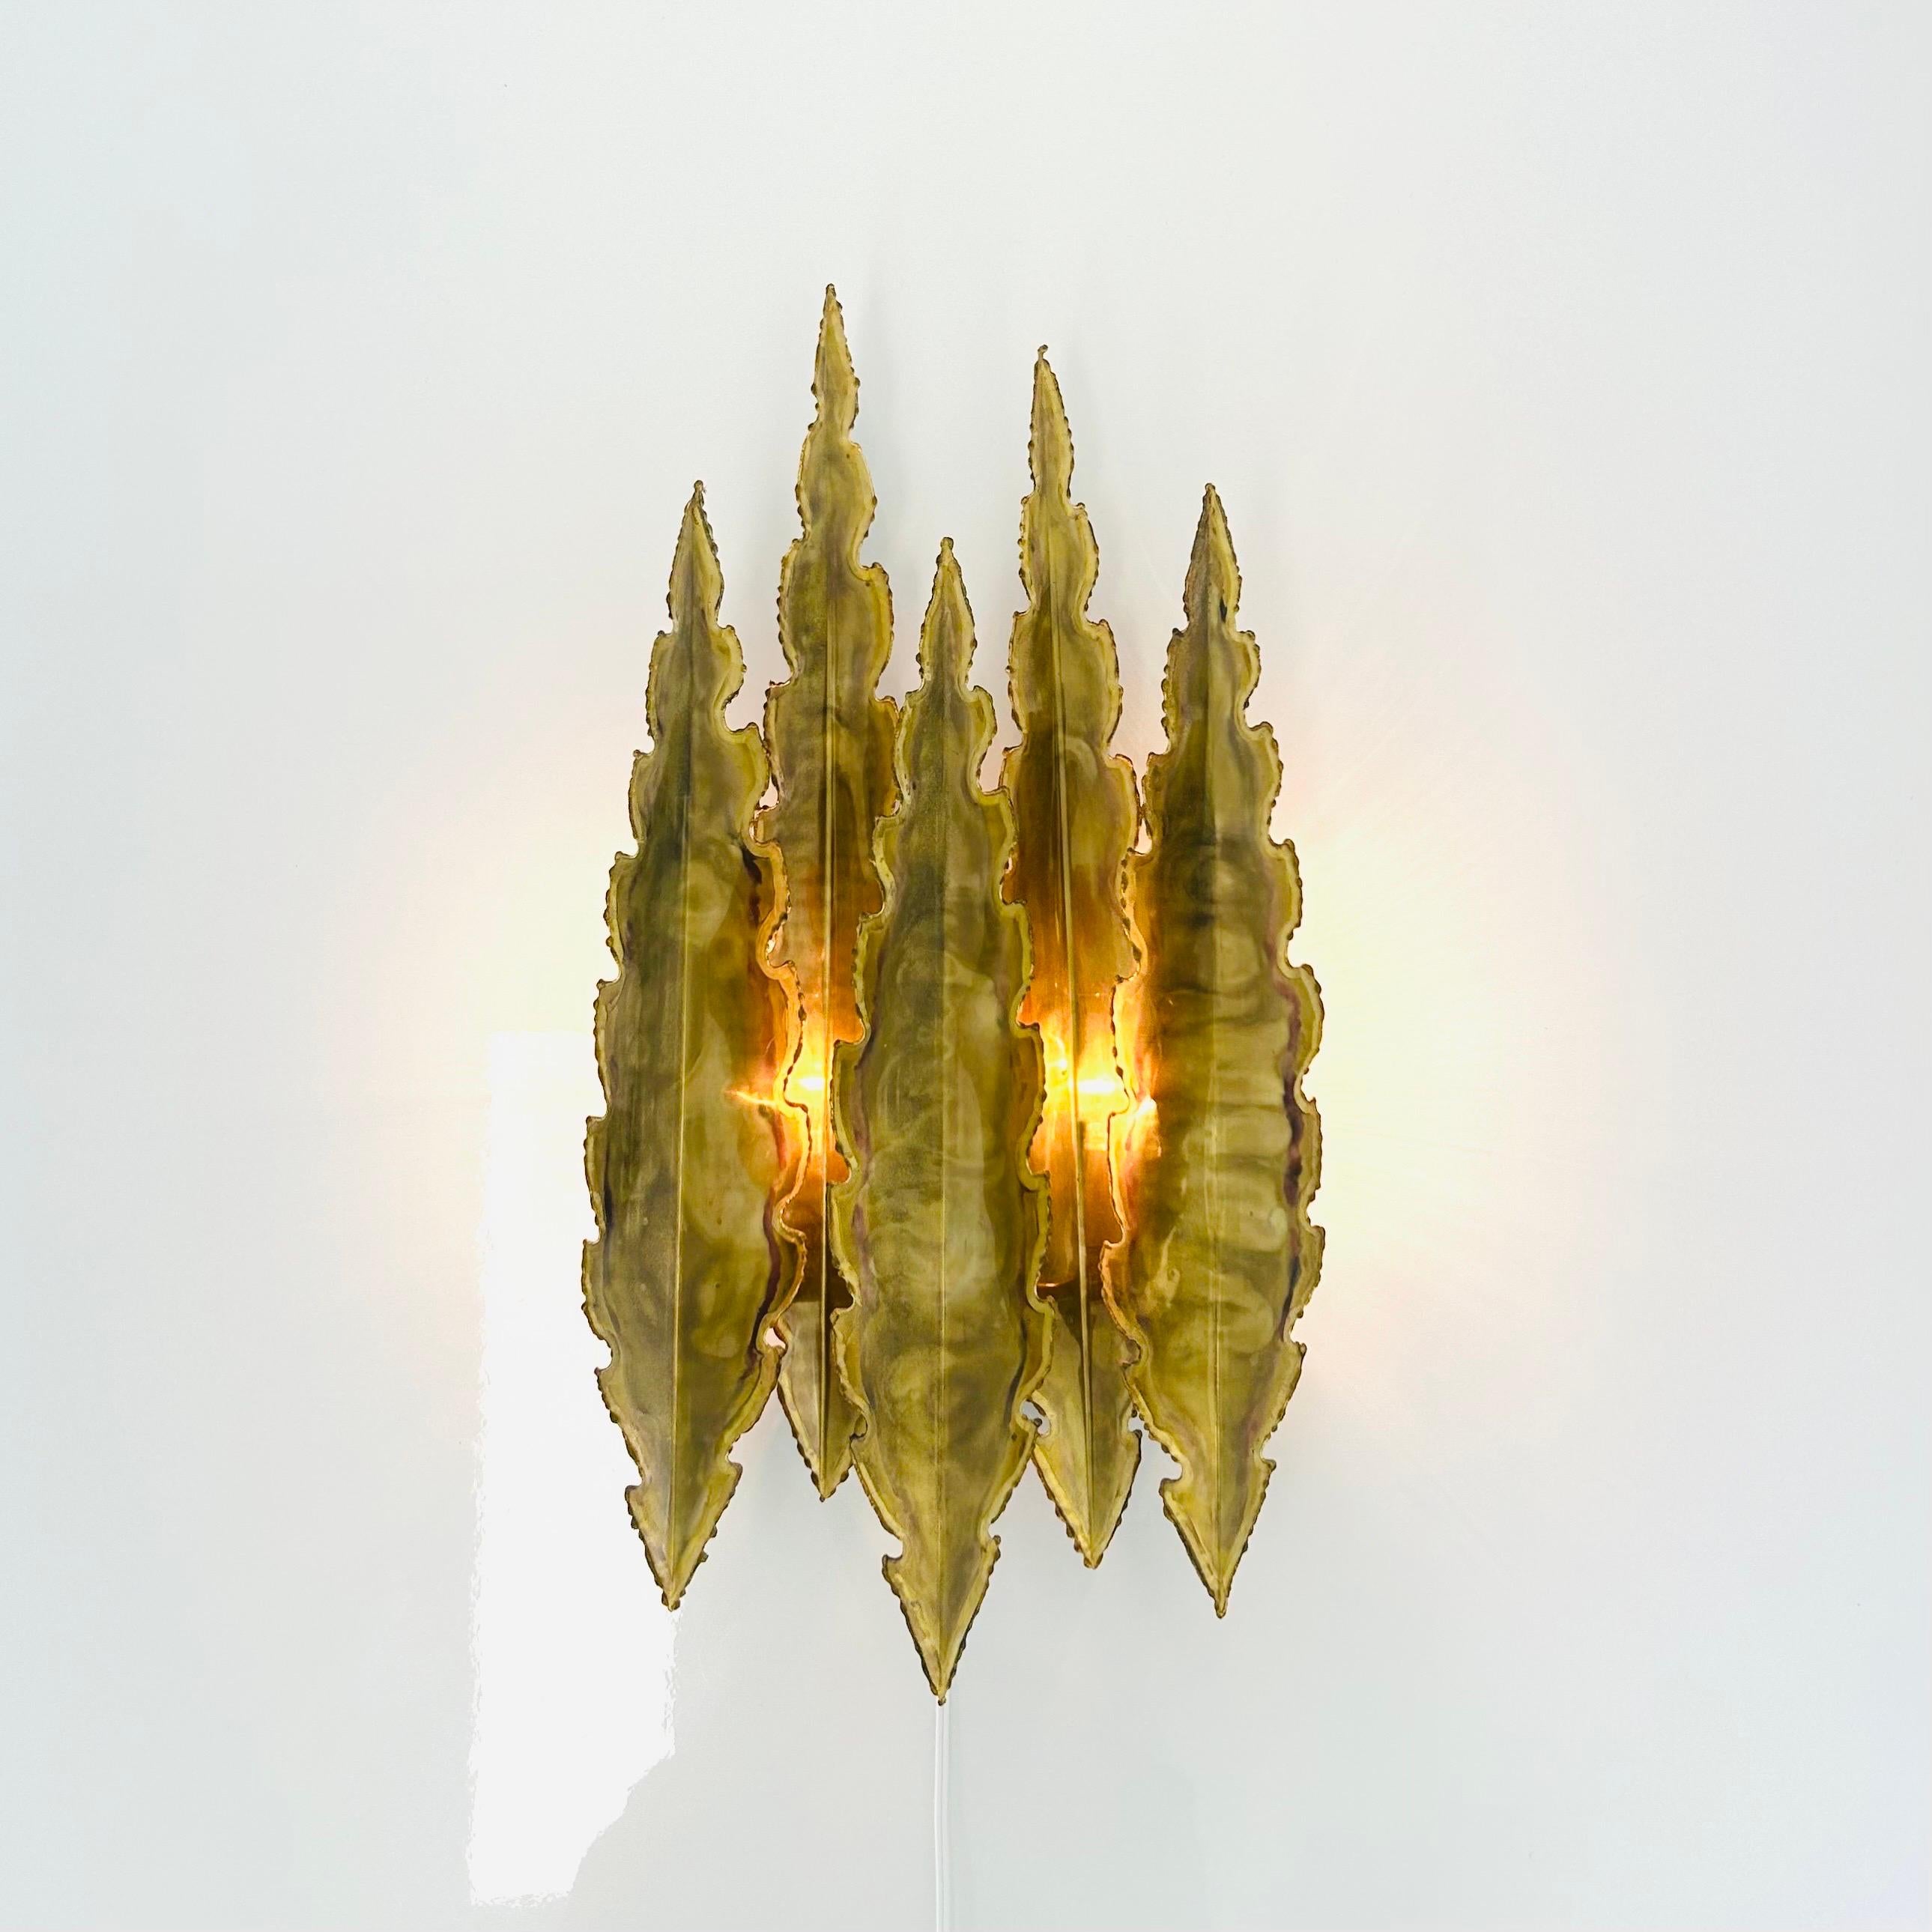 Mid-20th Century Pair of Large Brass Wall Lamps by Svend Aage Holm Sorensen, 1960s, Denmark For Sale